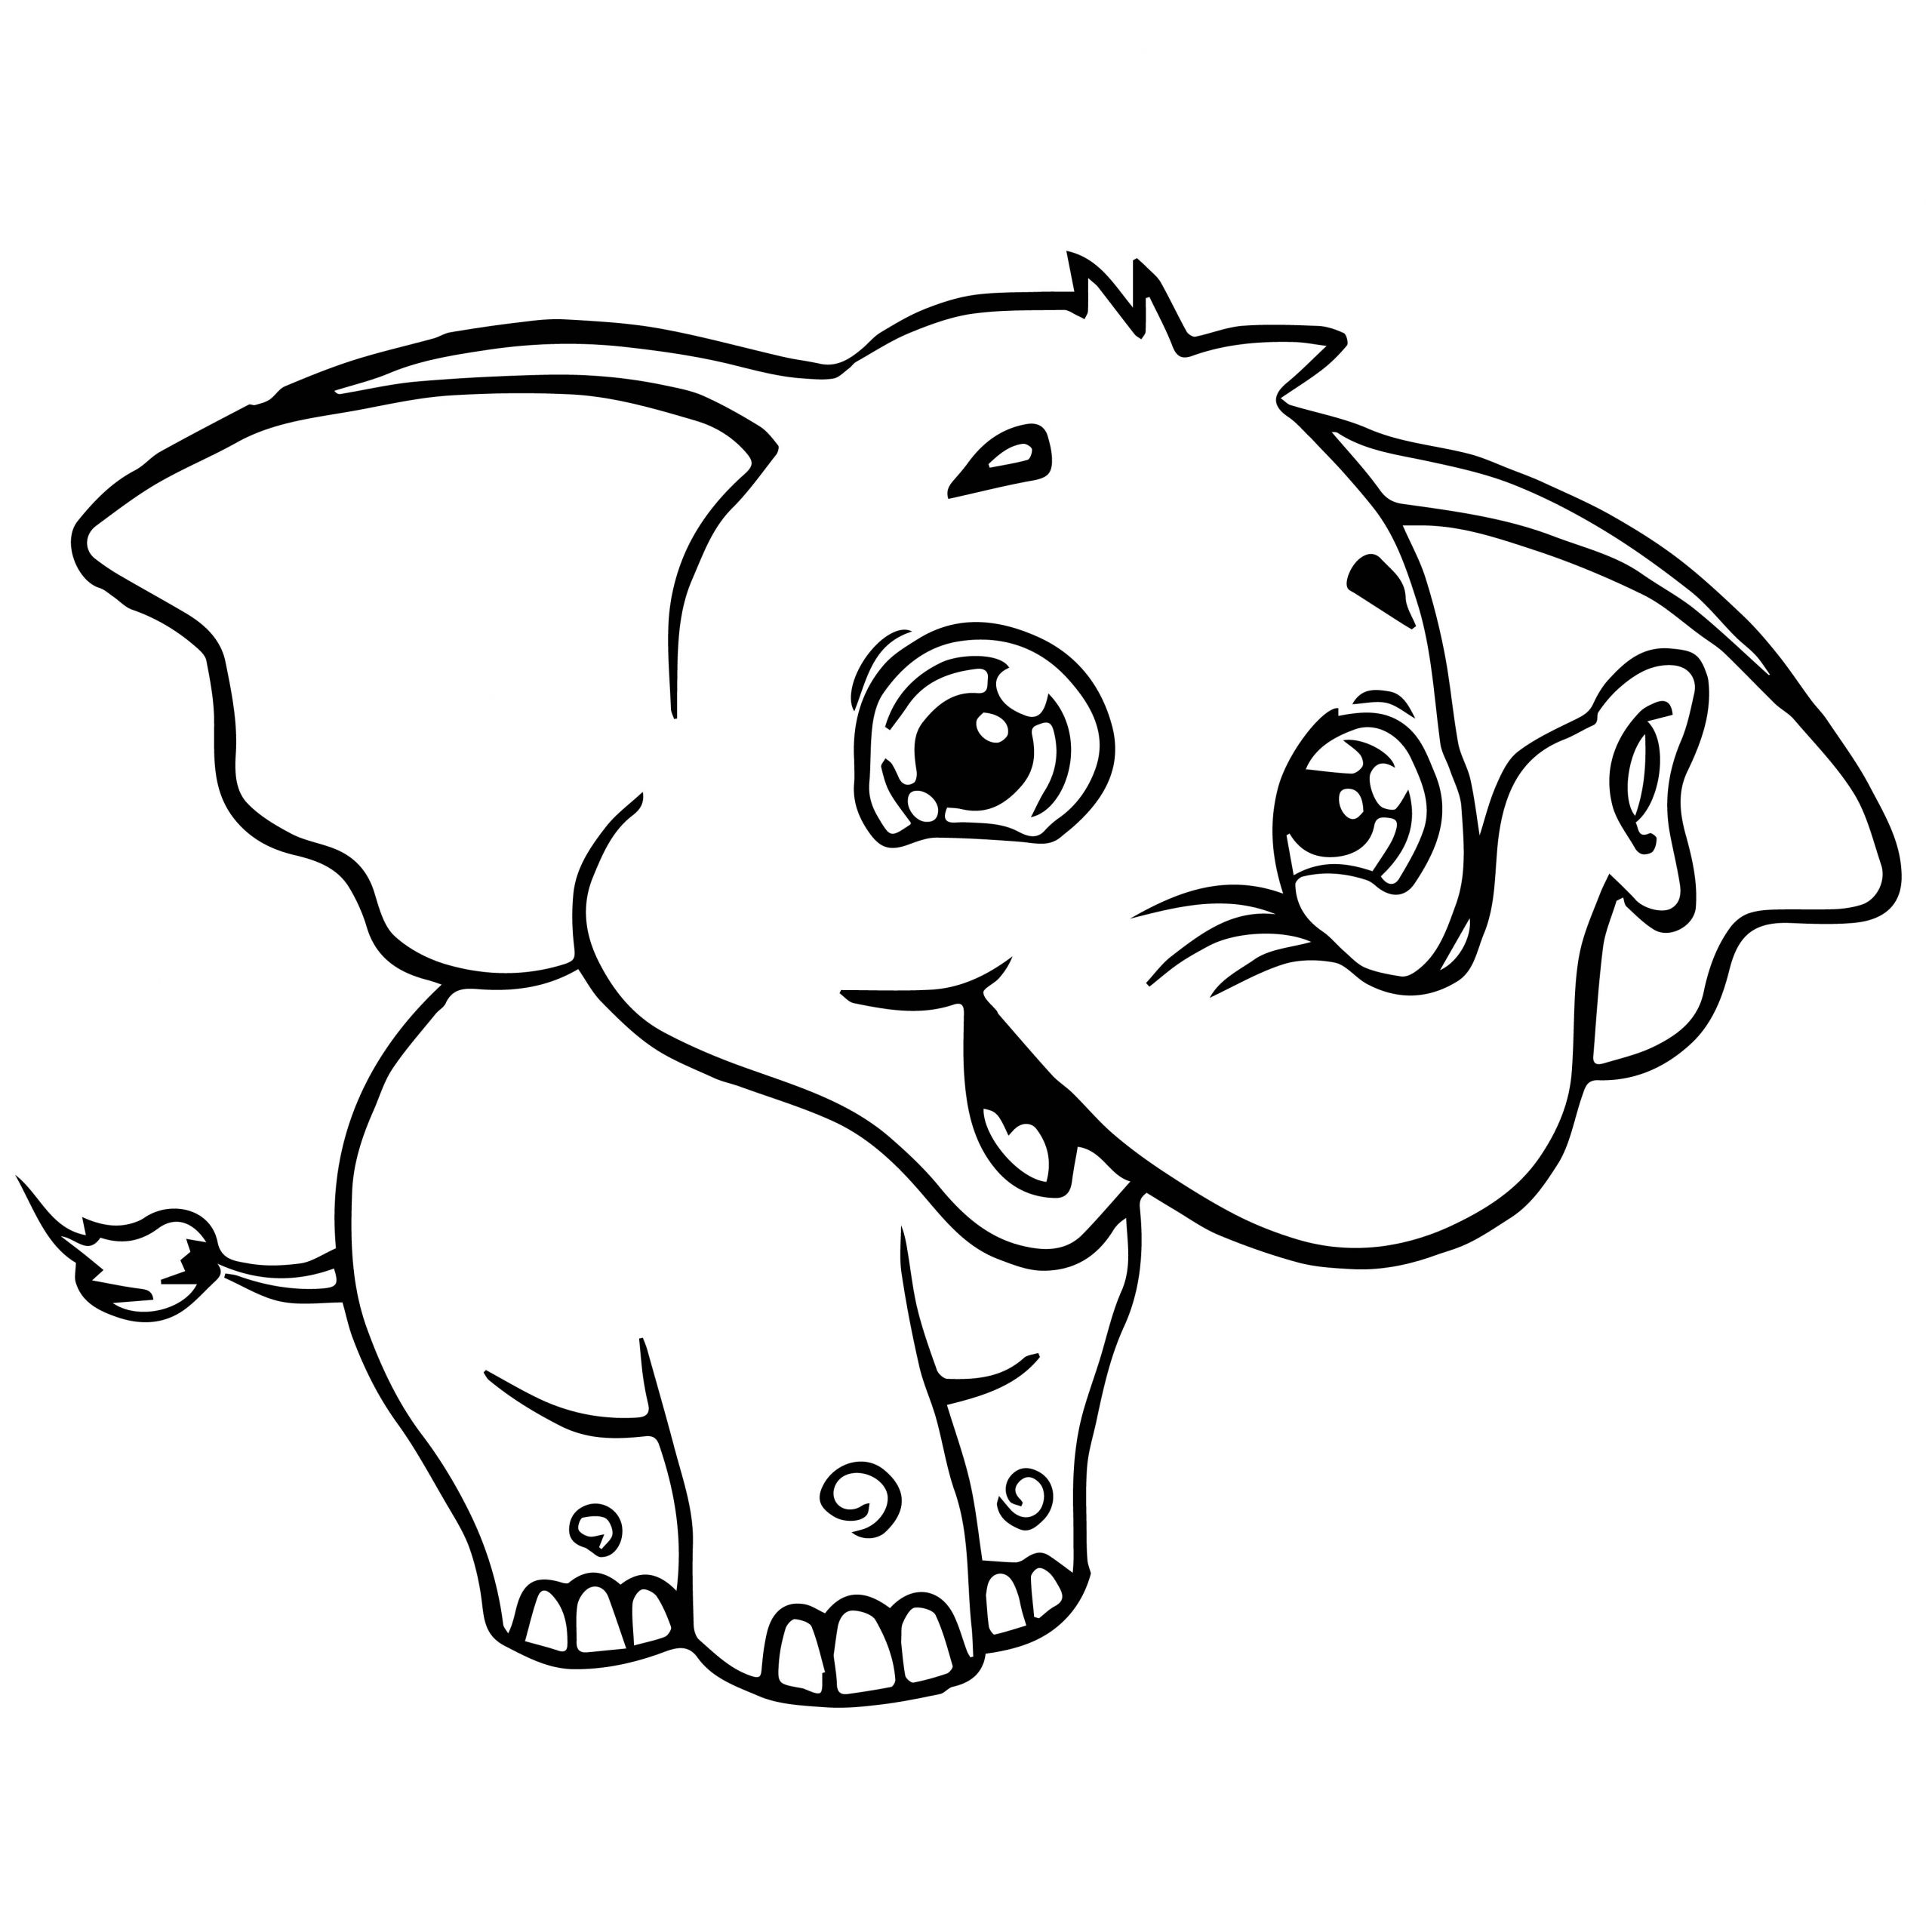 Cute Baby Elephant Coloring Pages
 Sweety Elephant Coloring Page